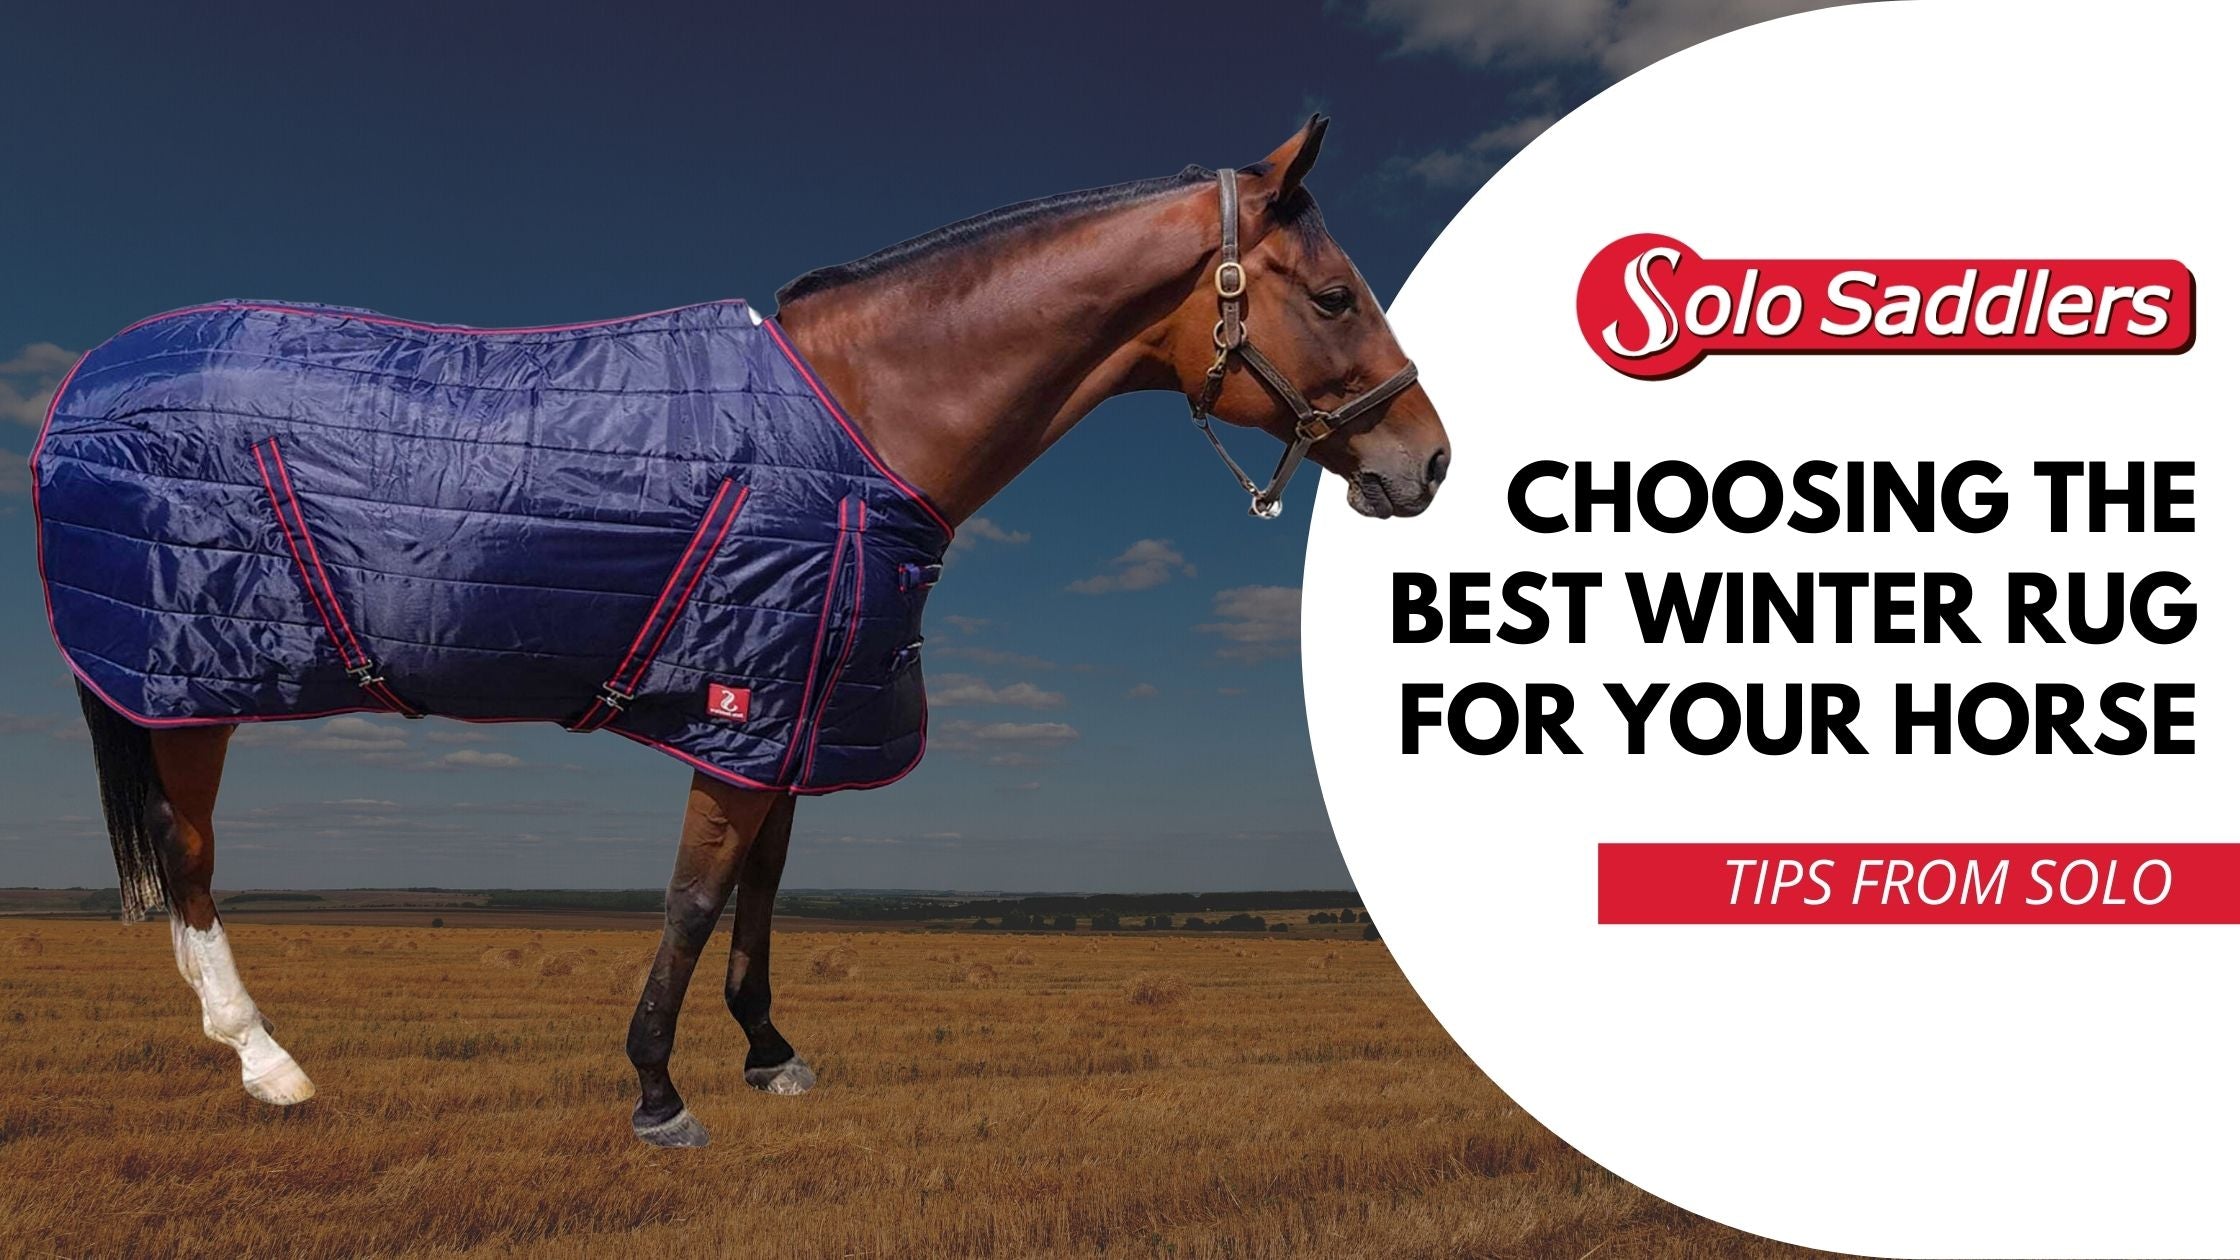 Choosing the best winter rug for your horse